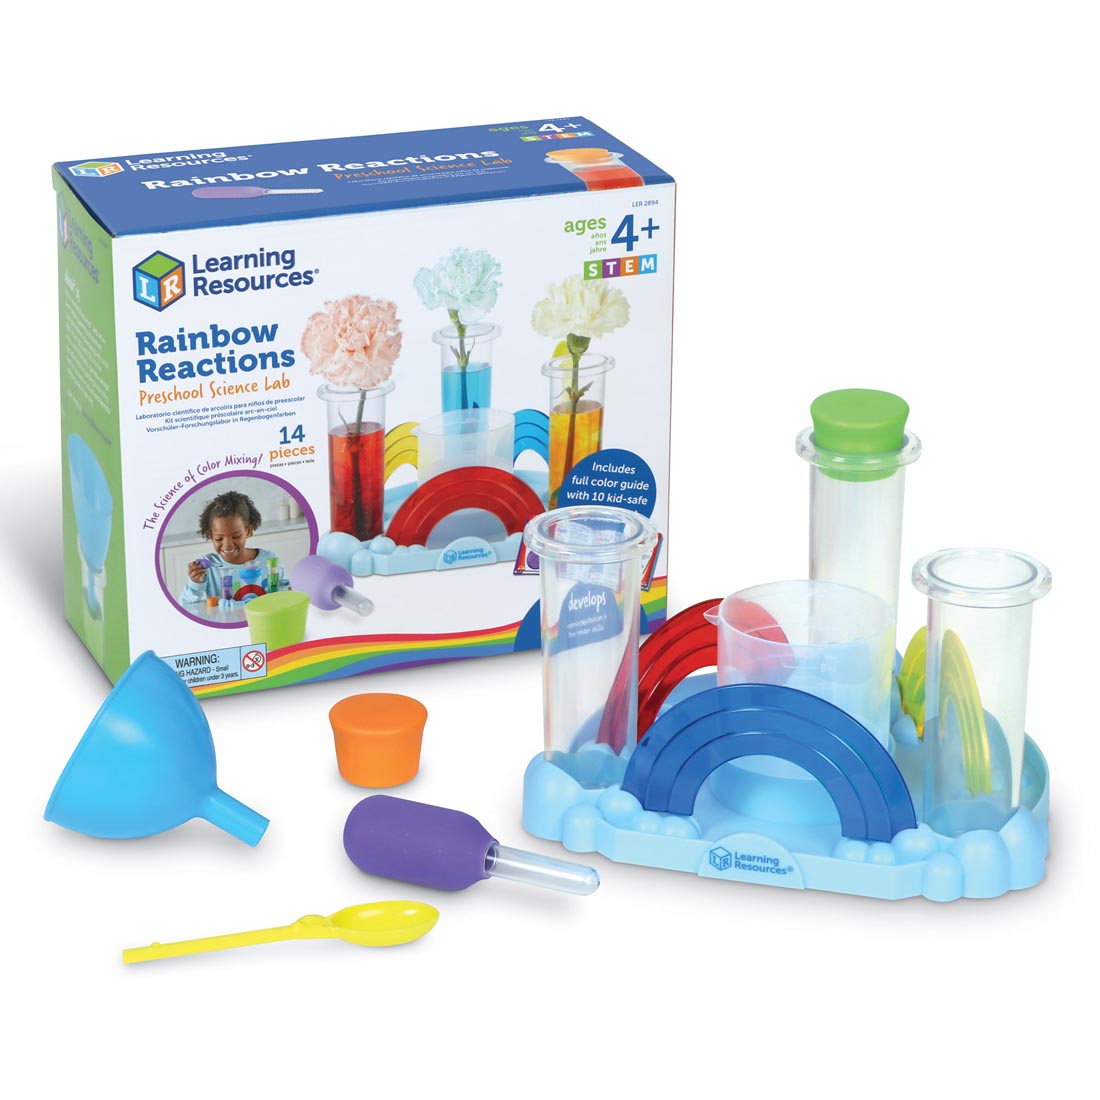 Rainbow Reactions Preschool Science Lab with contents shown outside the box